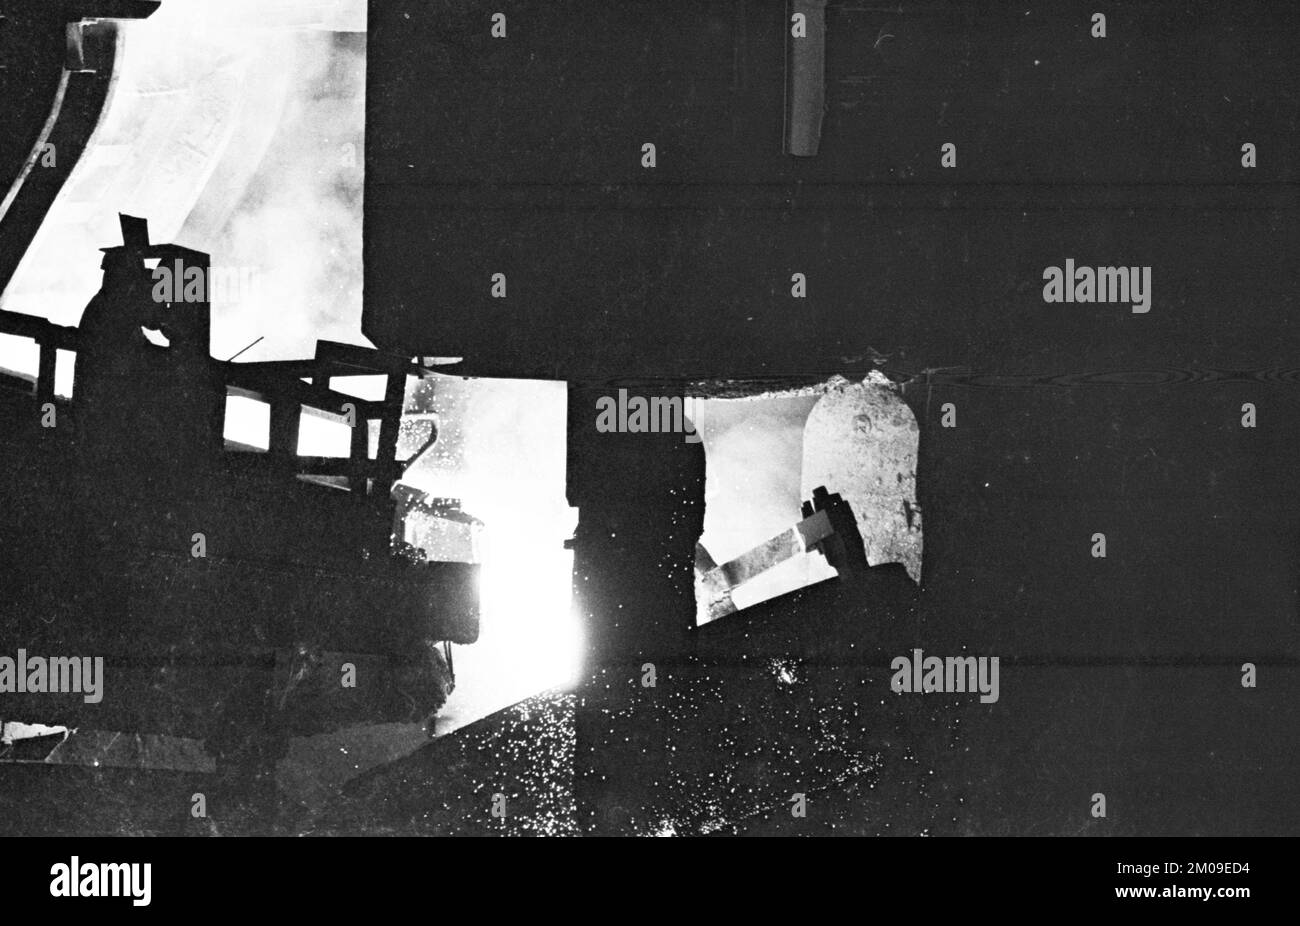 Steel production at the Hoesch AG steelworks in the Westfalenhuette on 4.12.1974 at the blast furnace and Siemens Martin furnace (SM) in Dortmund, Ger Stock Photo